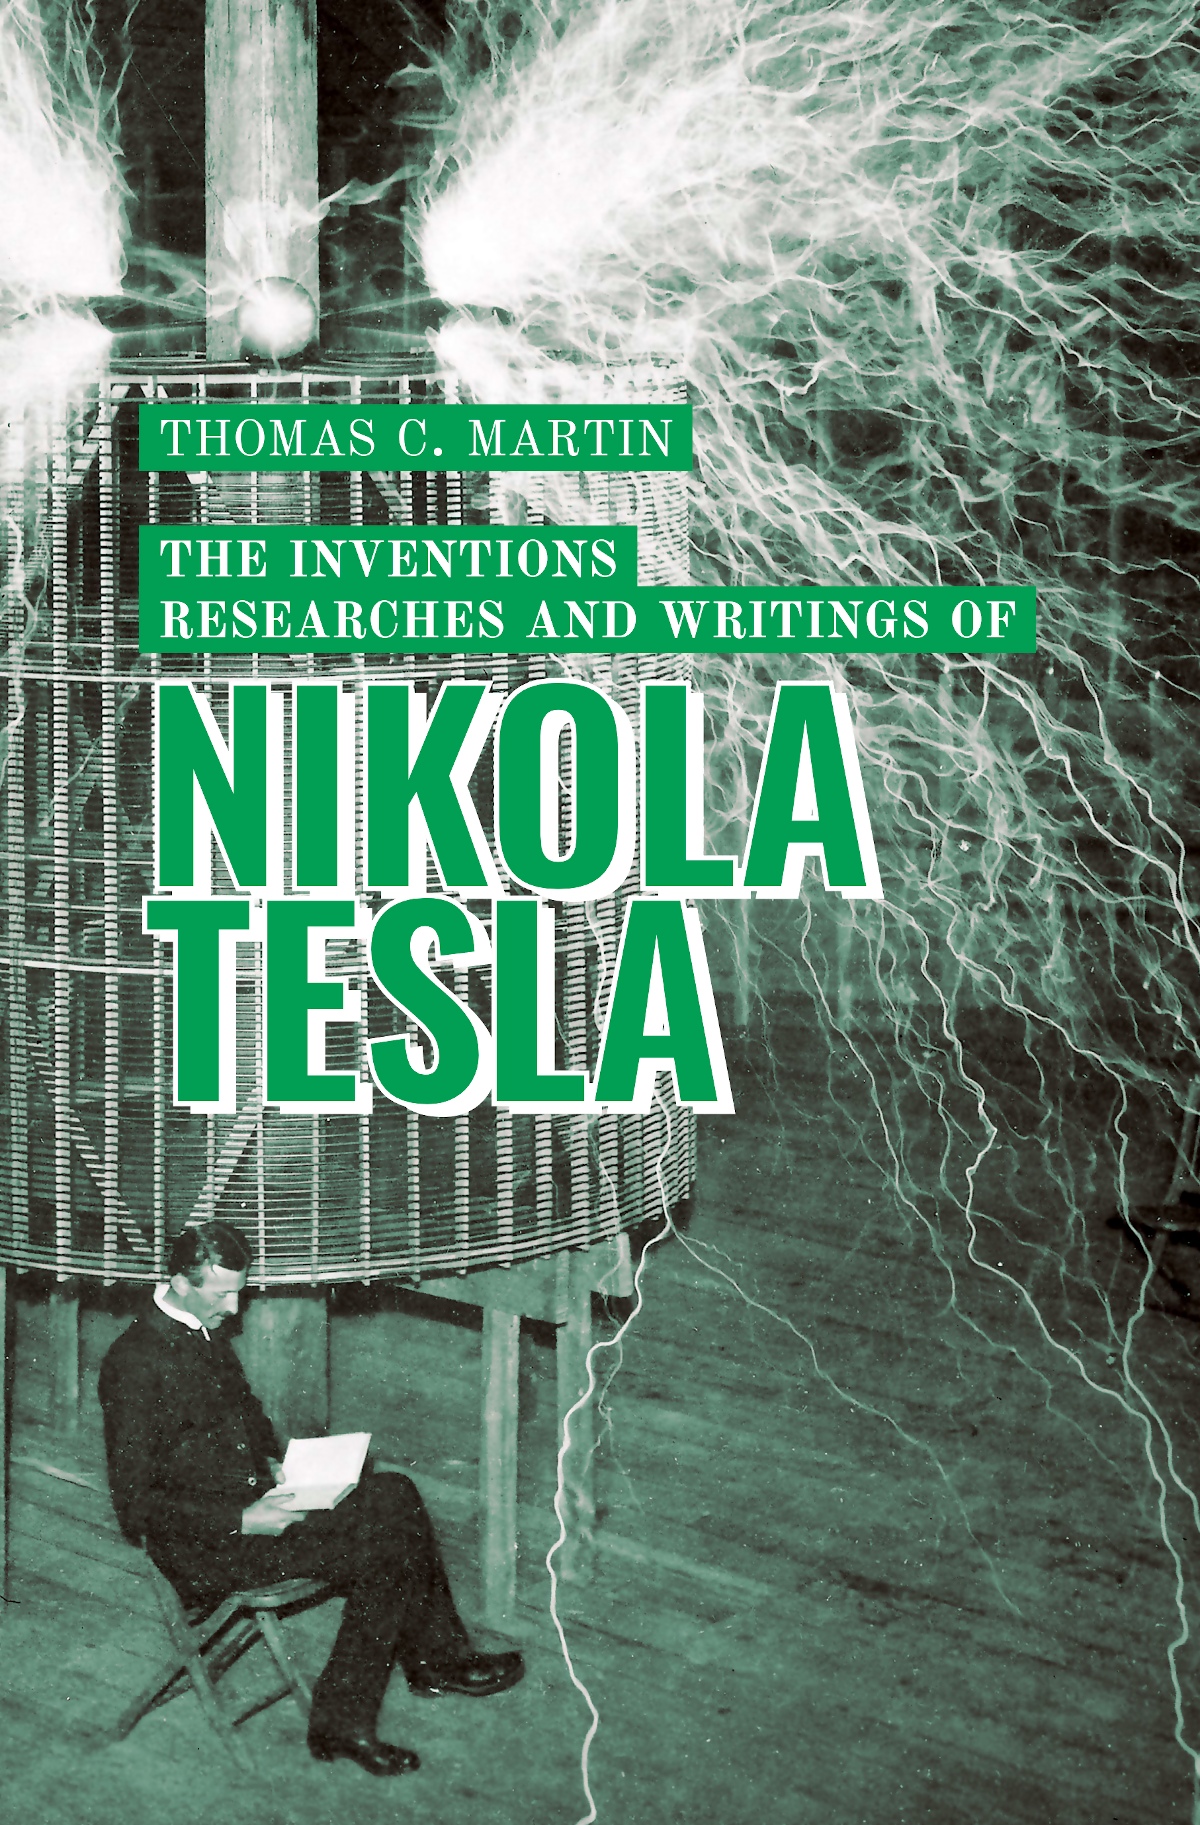 The Inventions, Researches and Writings of Nikola Tesla - Quaternion Books